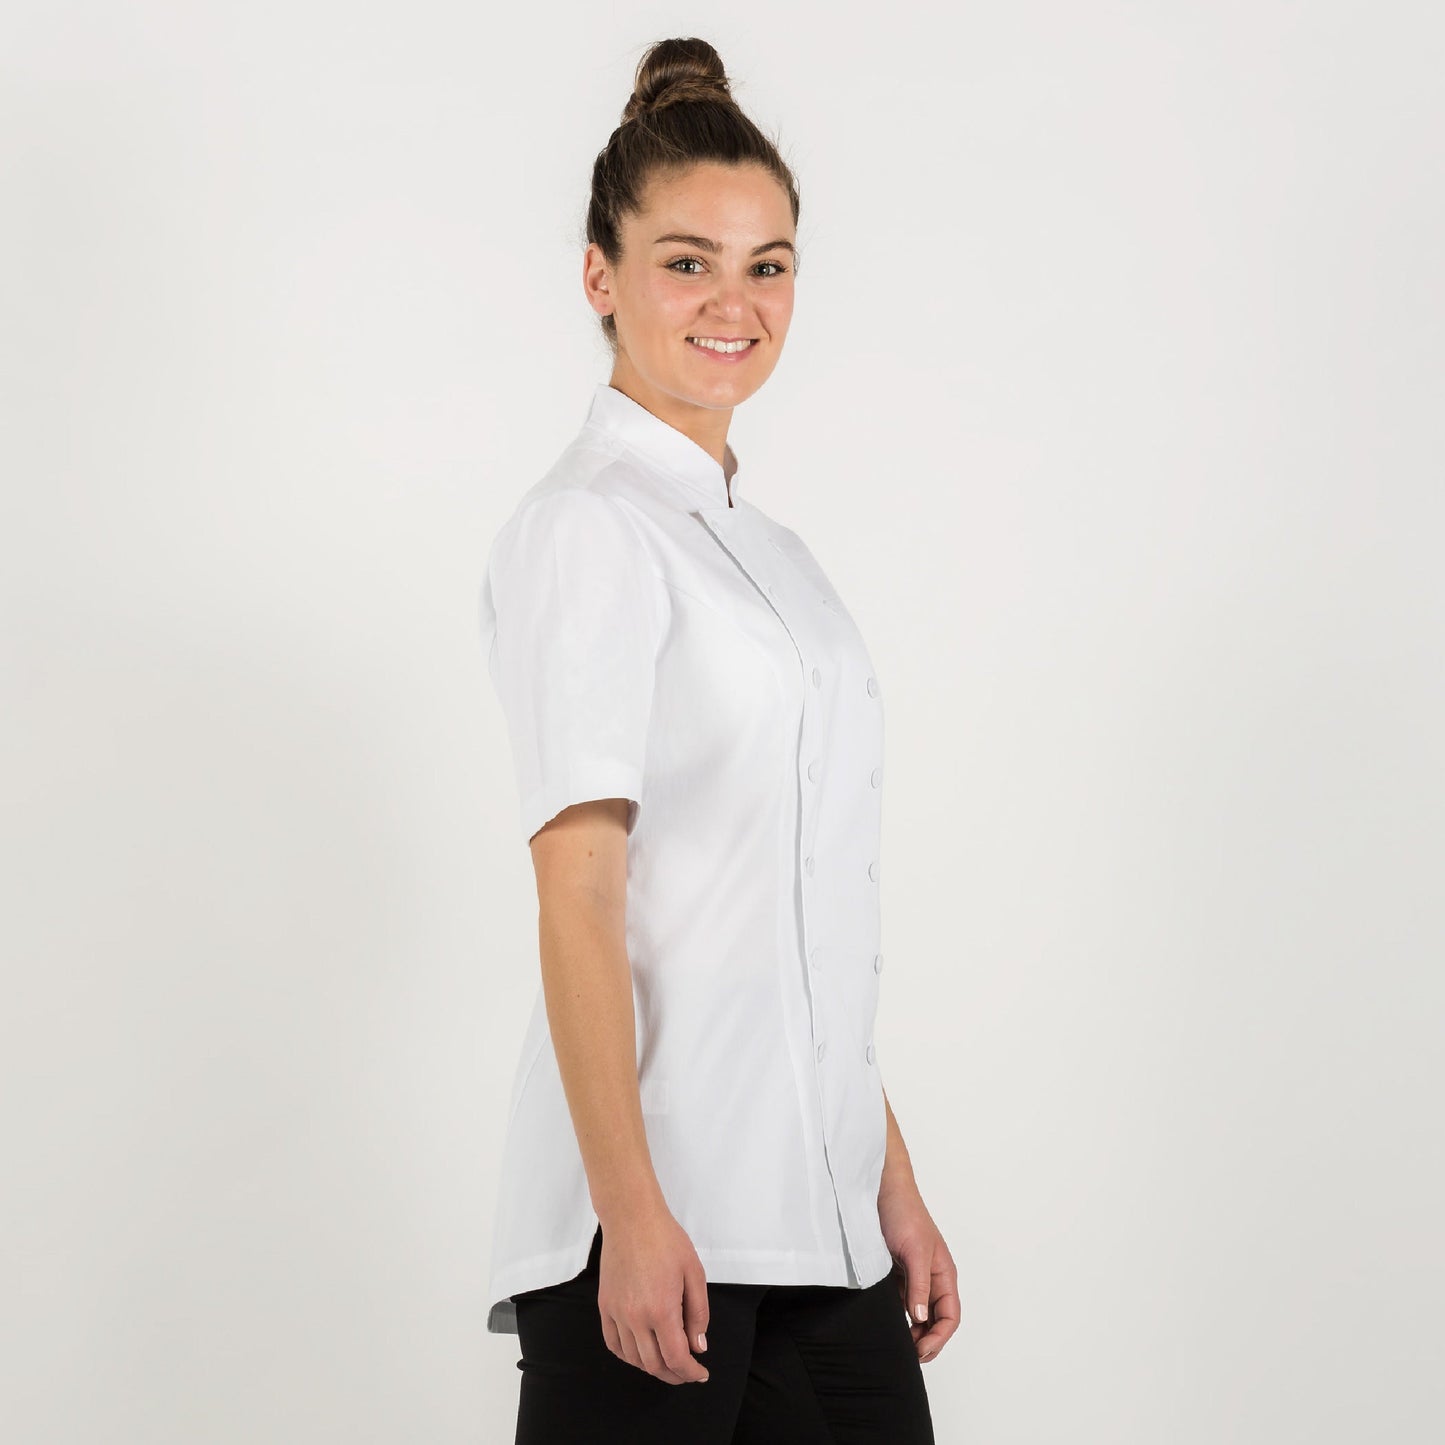 SALE- Ladies PREMIUM white chef jacket with short sleeves, made from Organic cotton ( medium weight fabric )